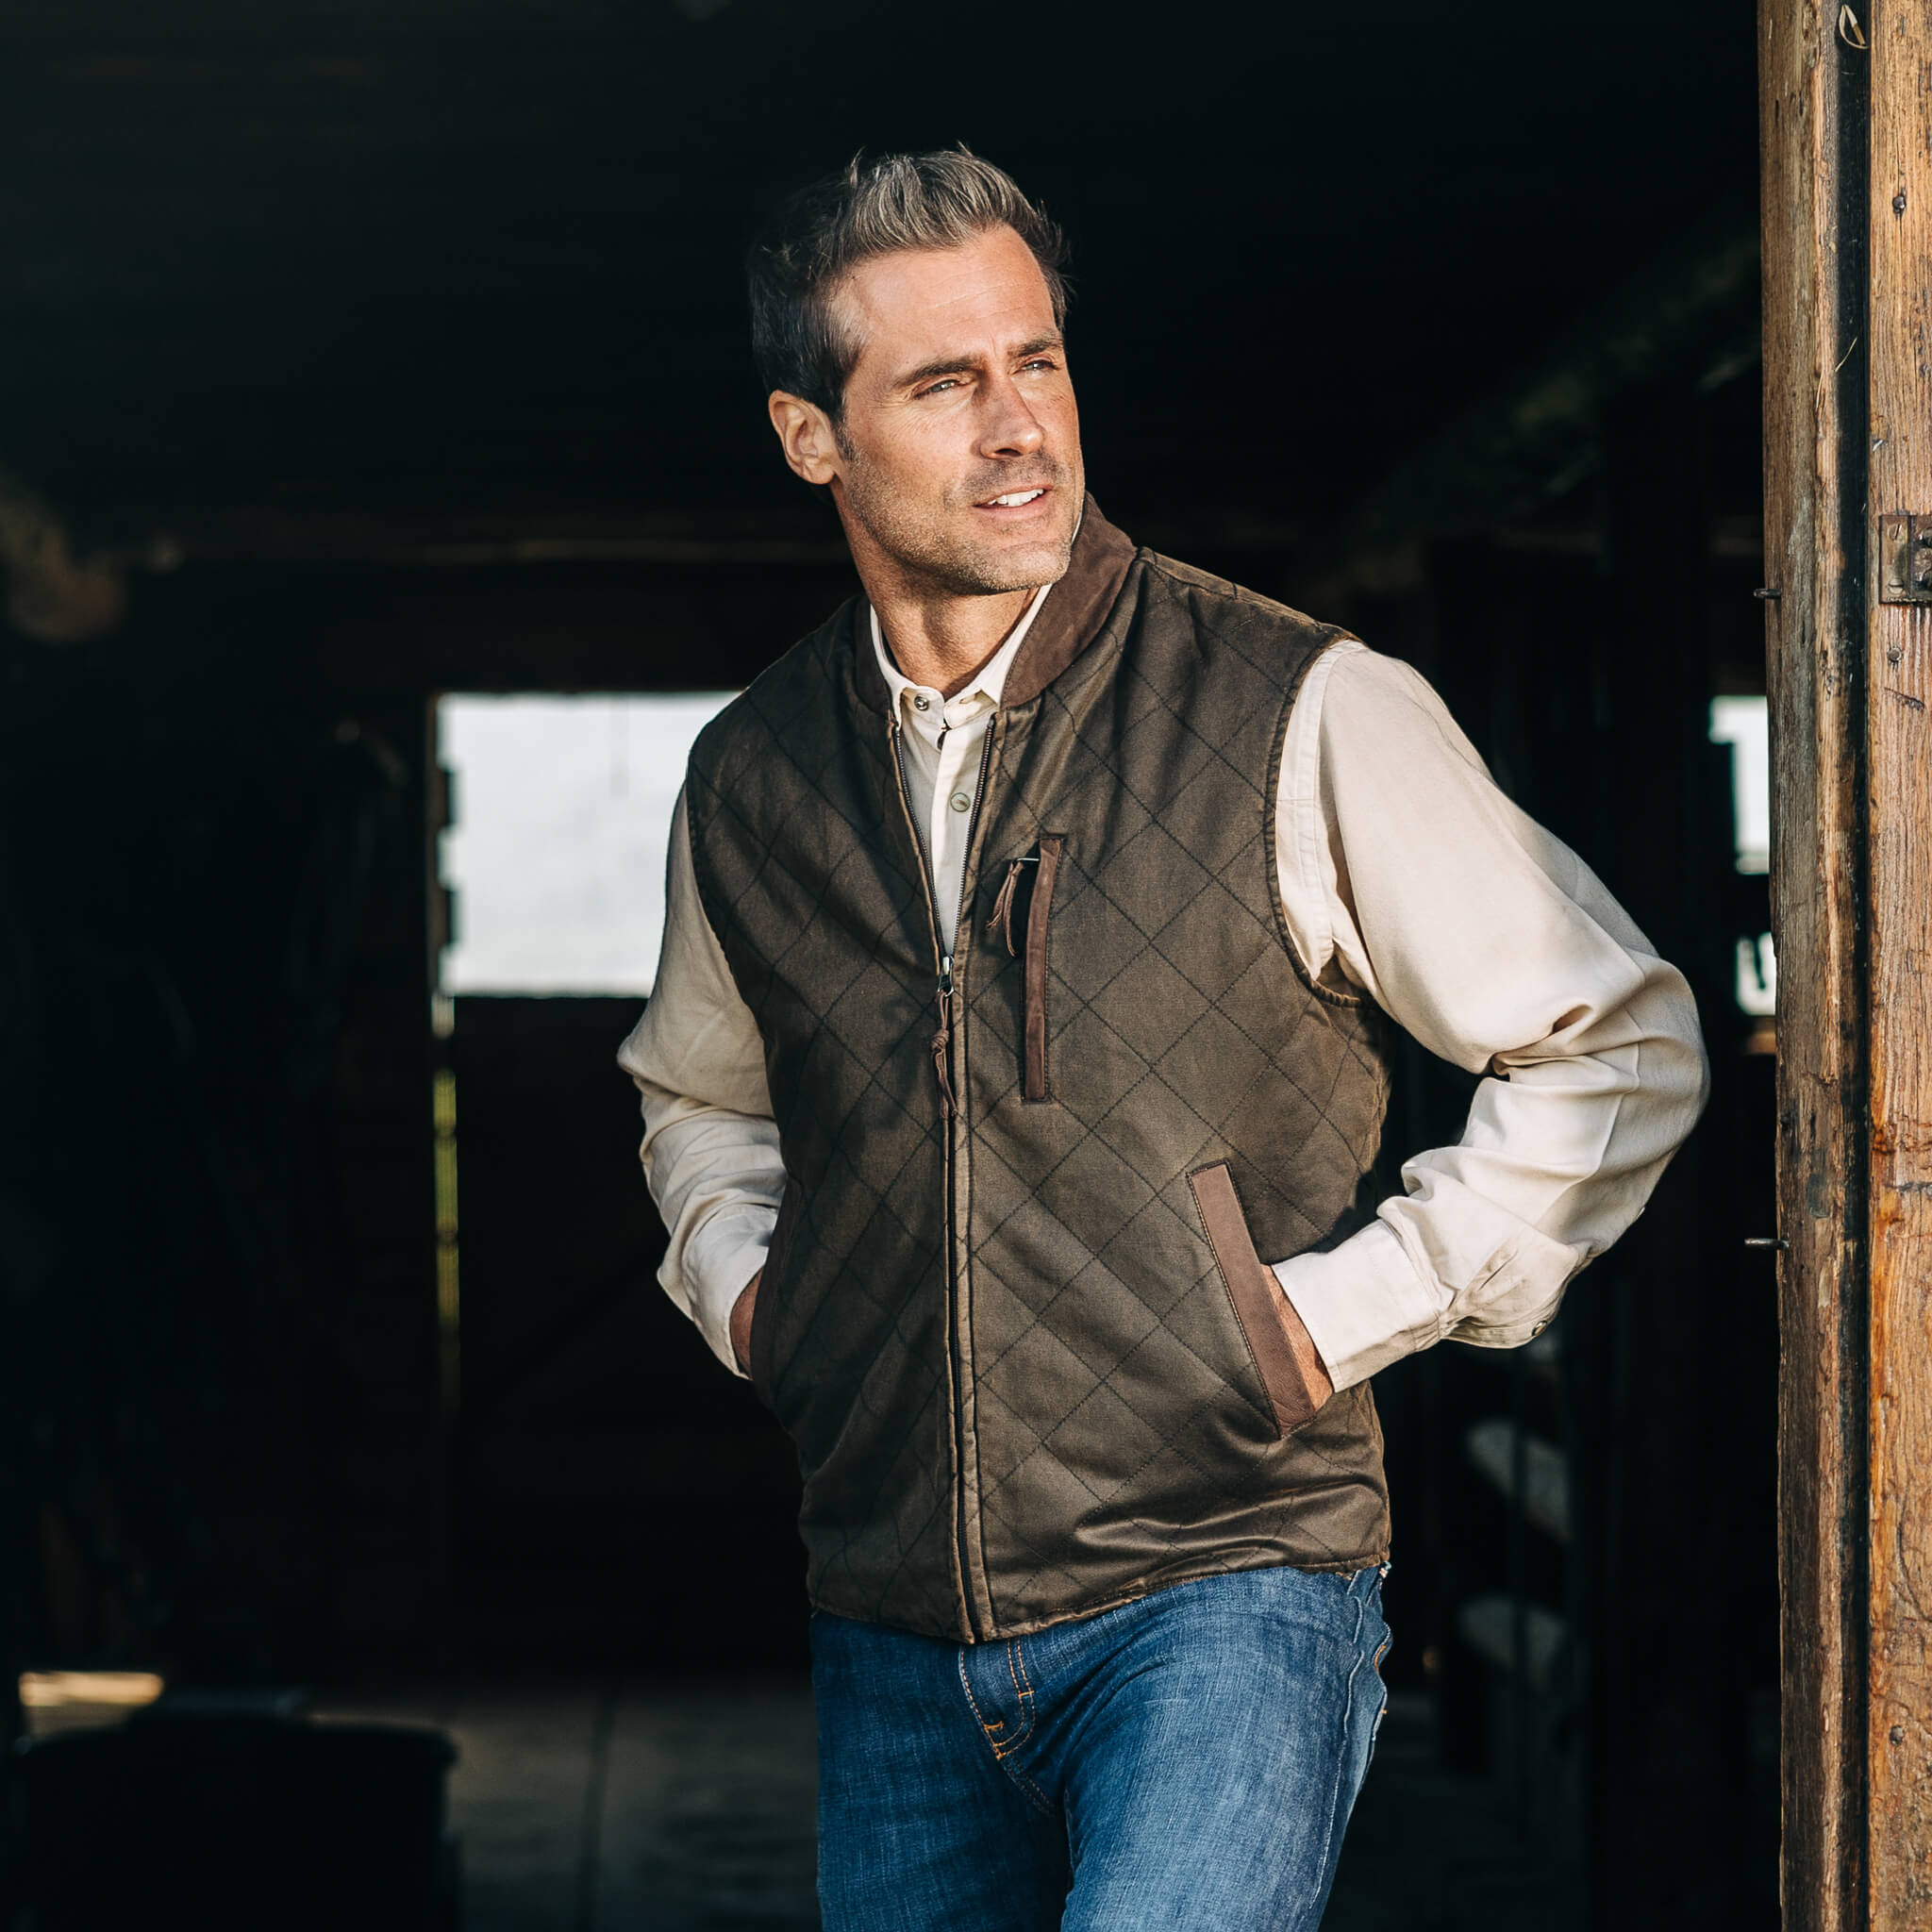 Kennesaw Concealed Carry Quilted Twill Vest - Madison Creek Outfitters